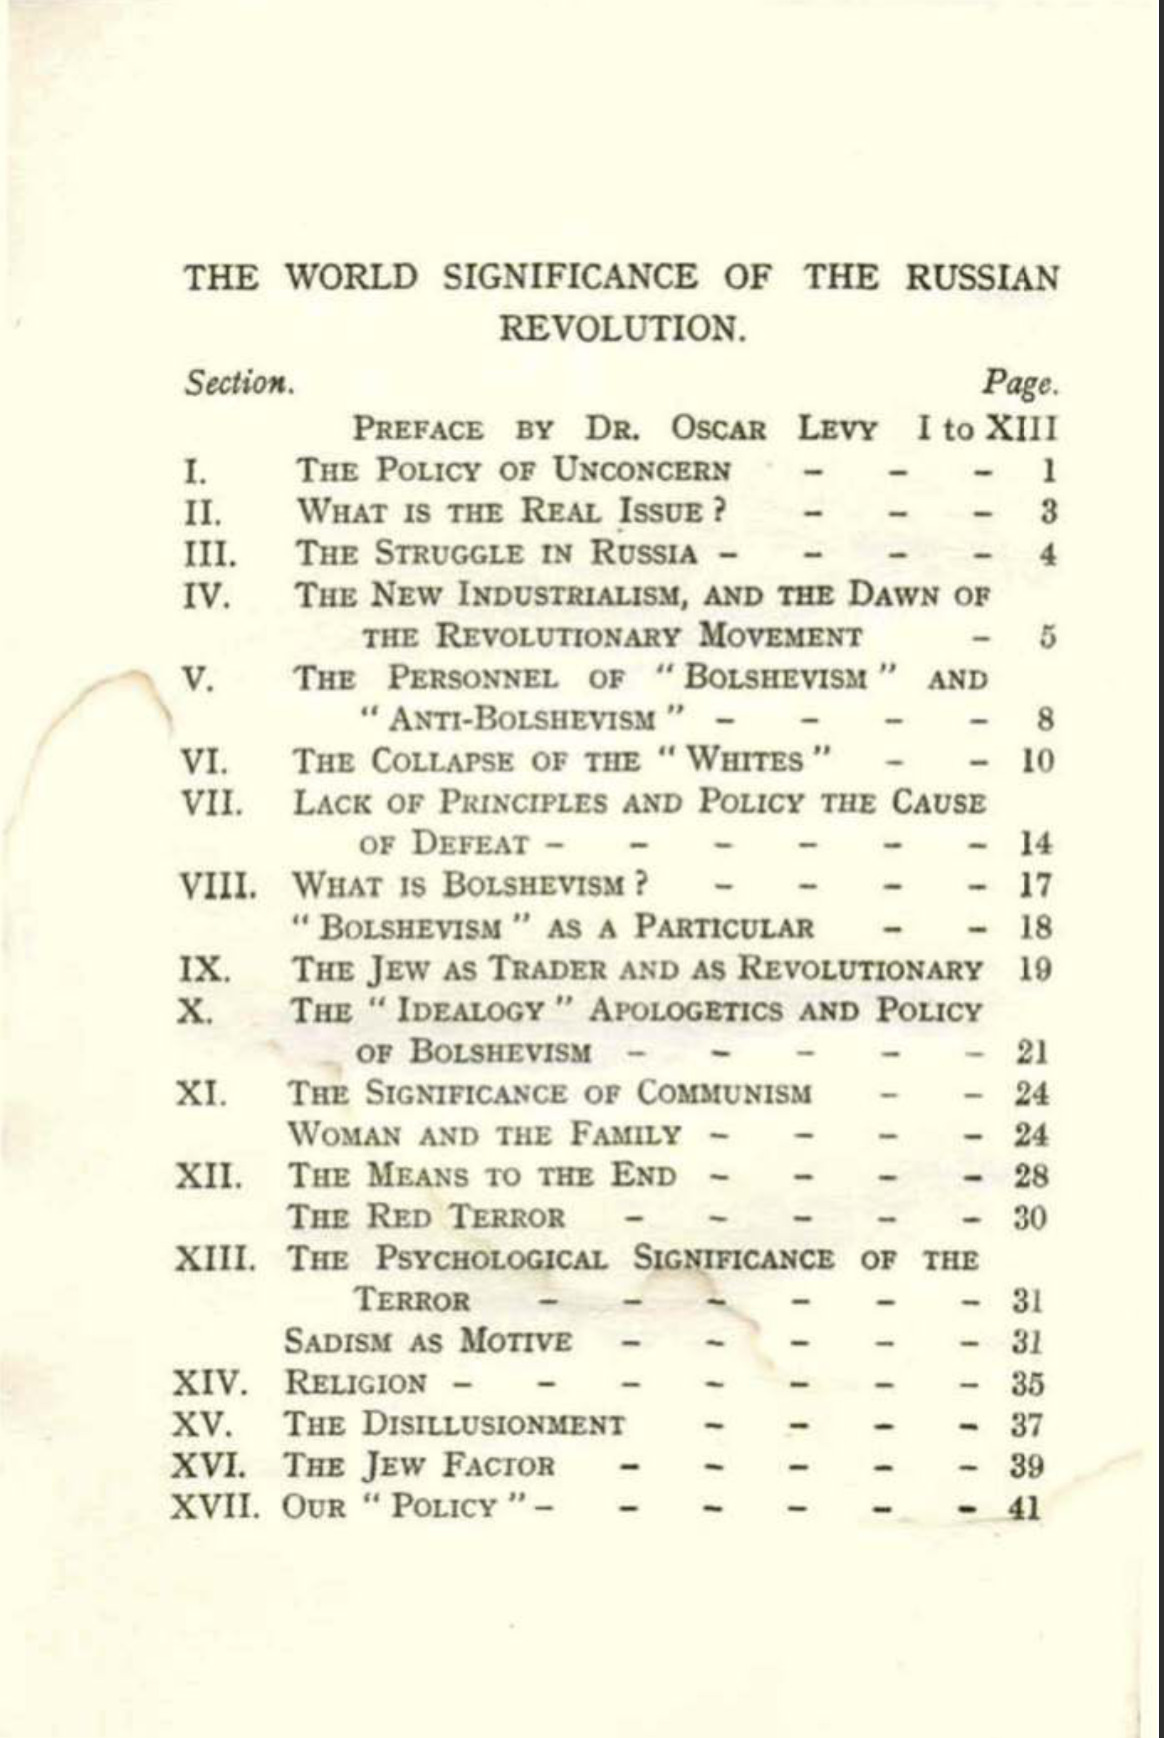 Contents of The World Significance of the Russian Revolution (1920) by George Pitt-Rivers